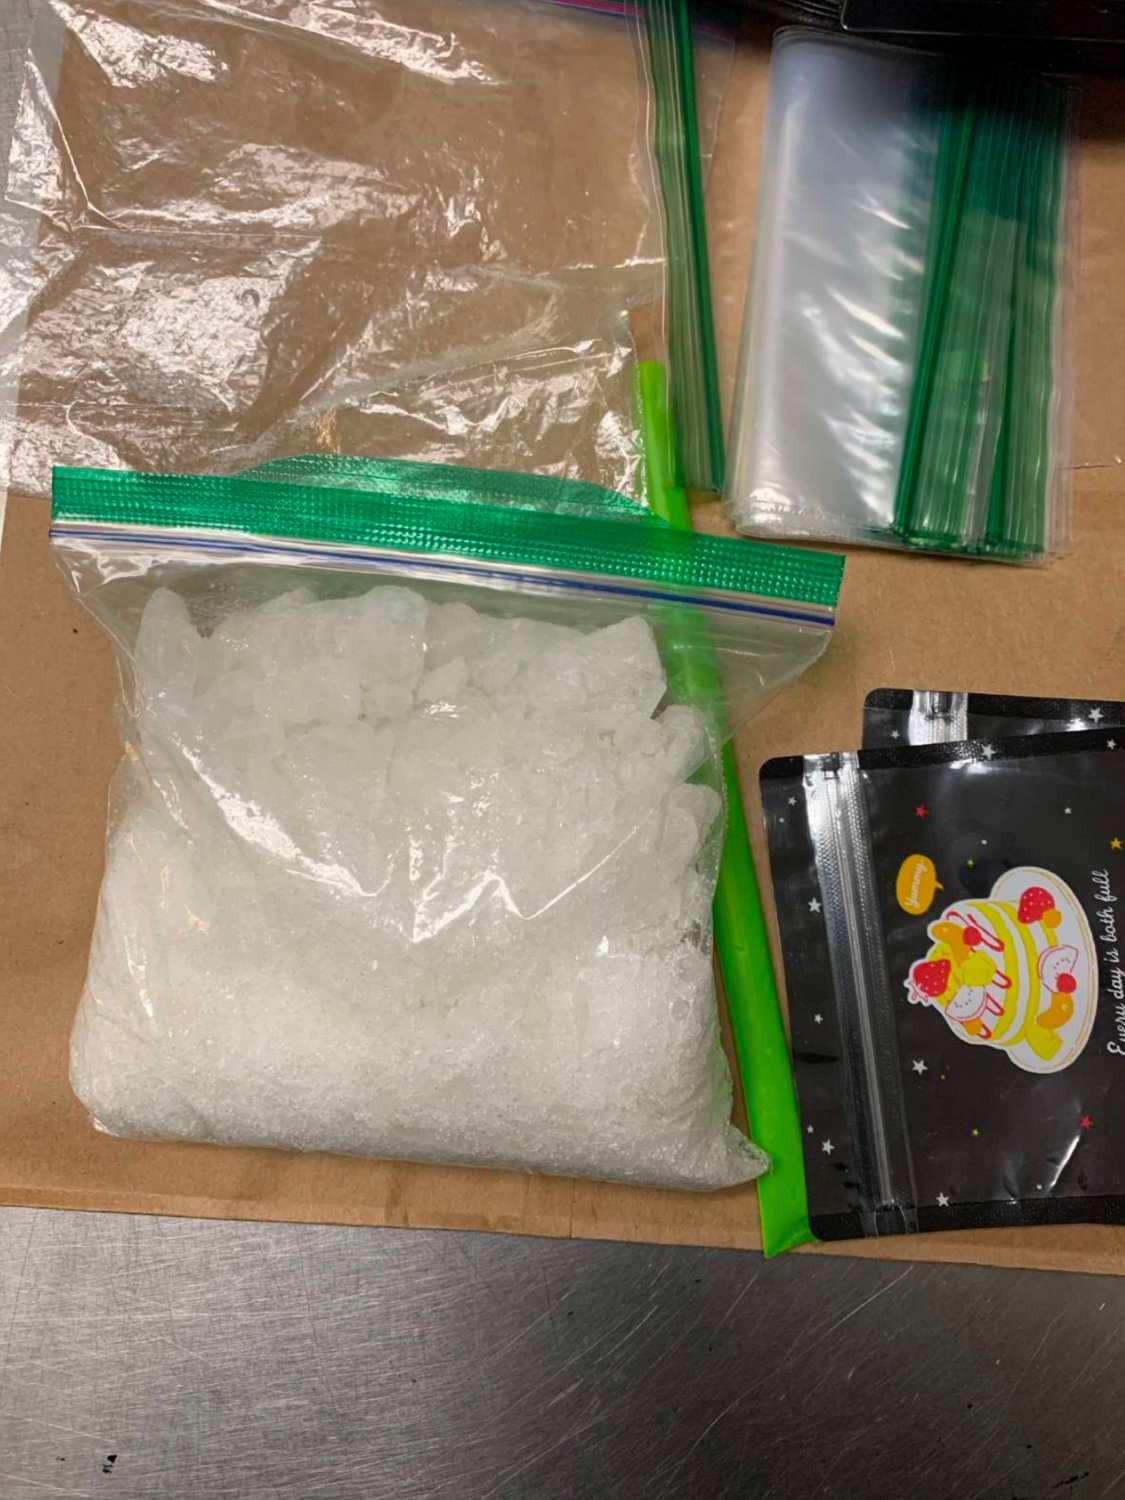 Police said methamphetamine, empty Ziplock bags, a black scale, and a large quantity of cash were recovered from the suspect.